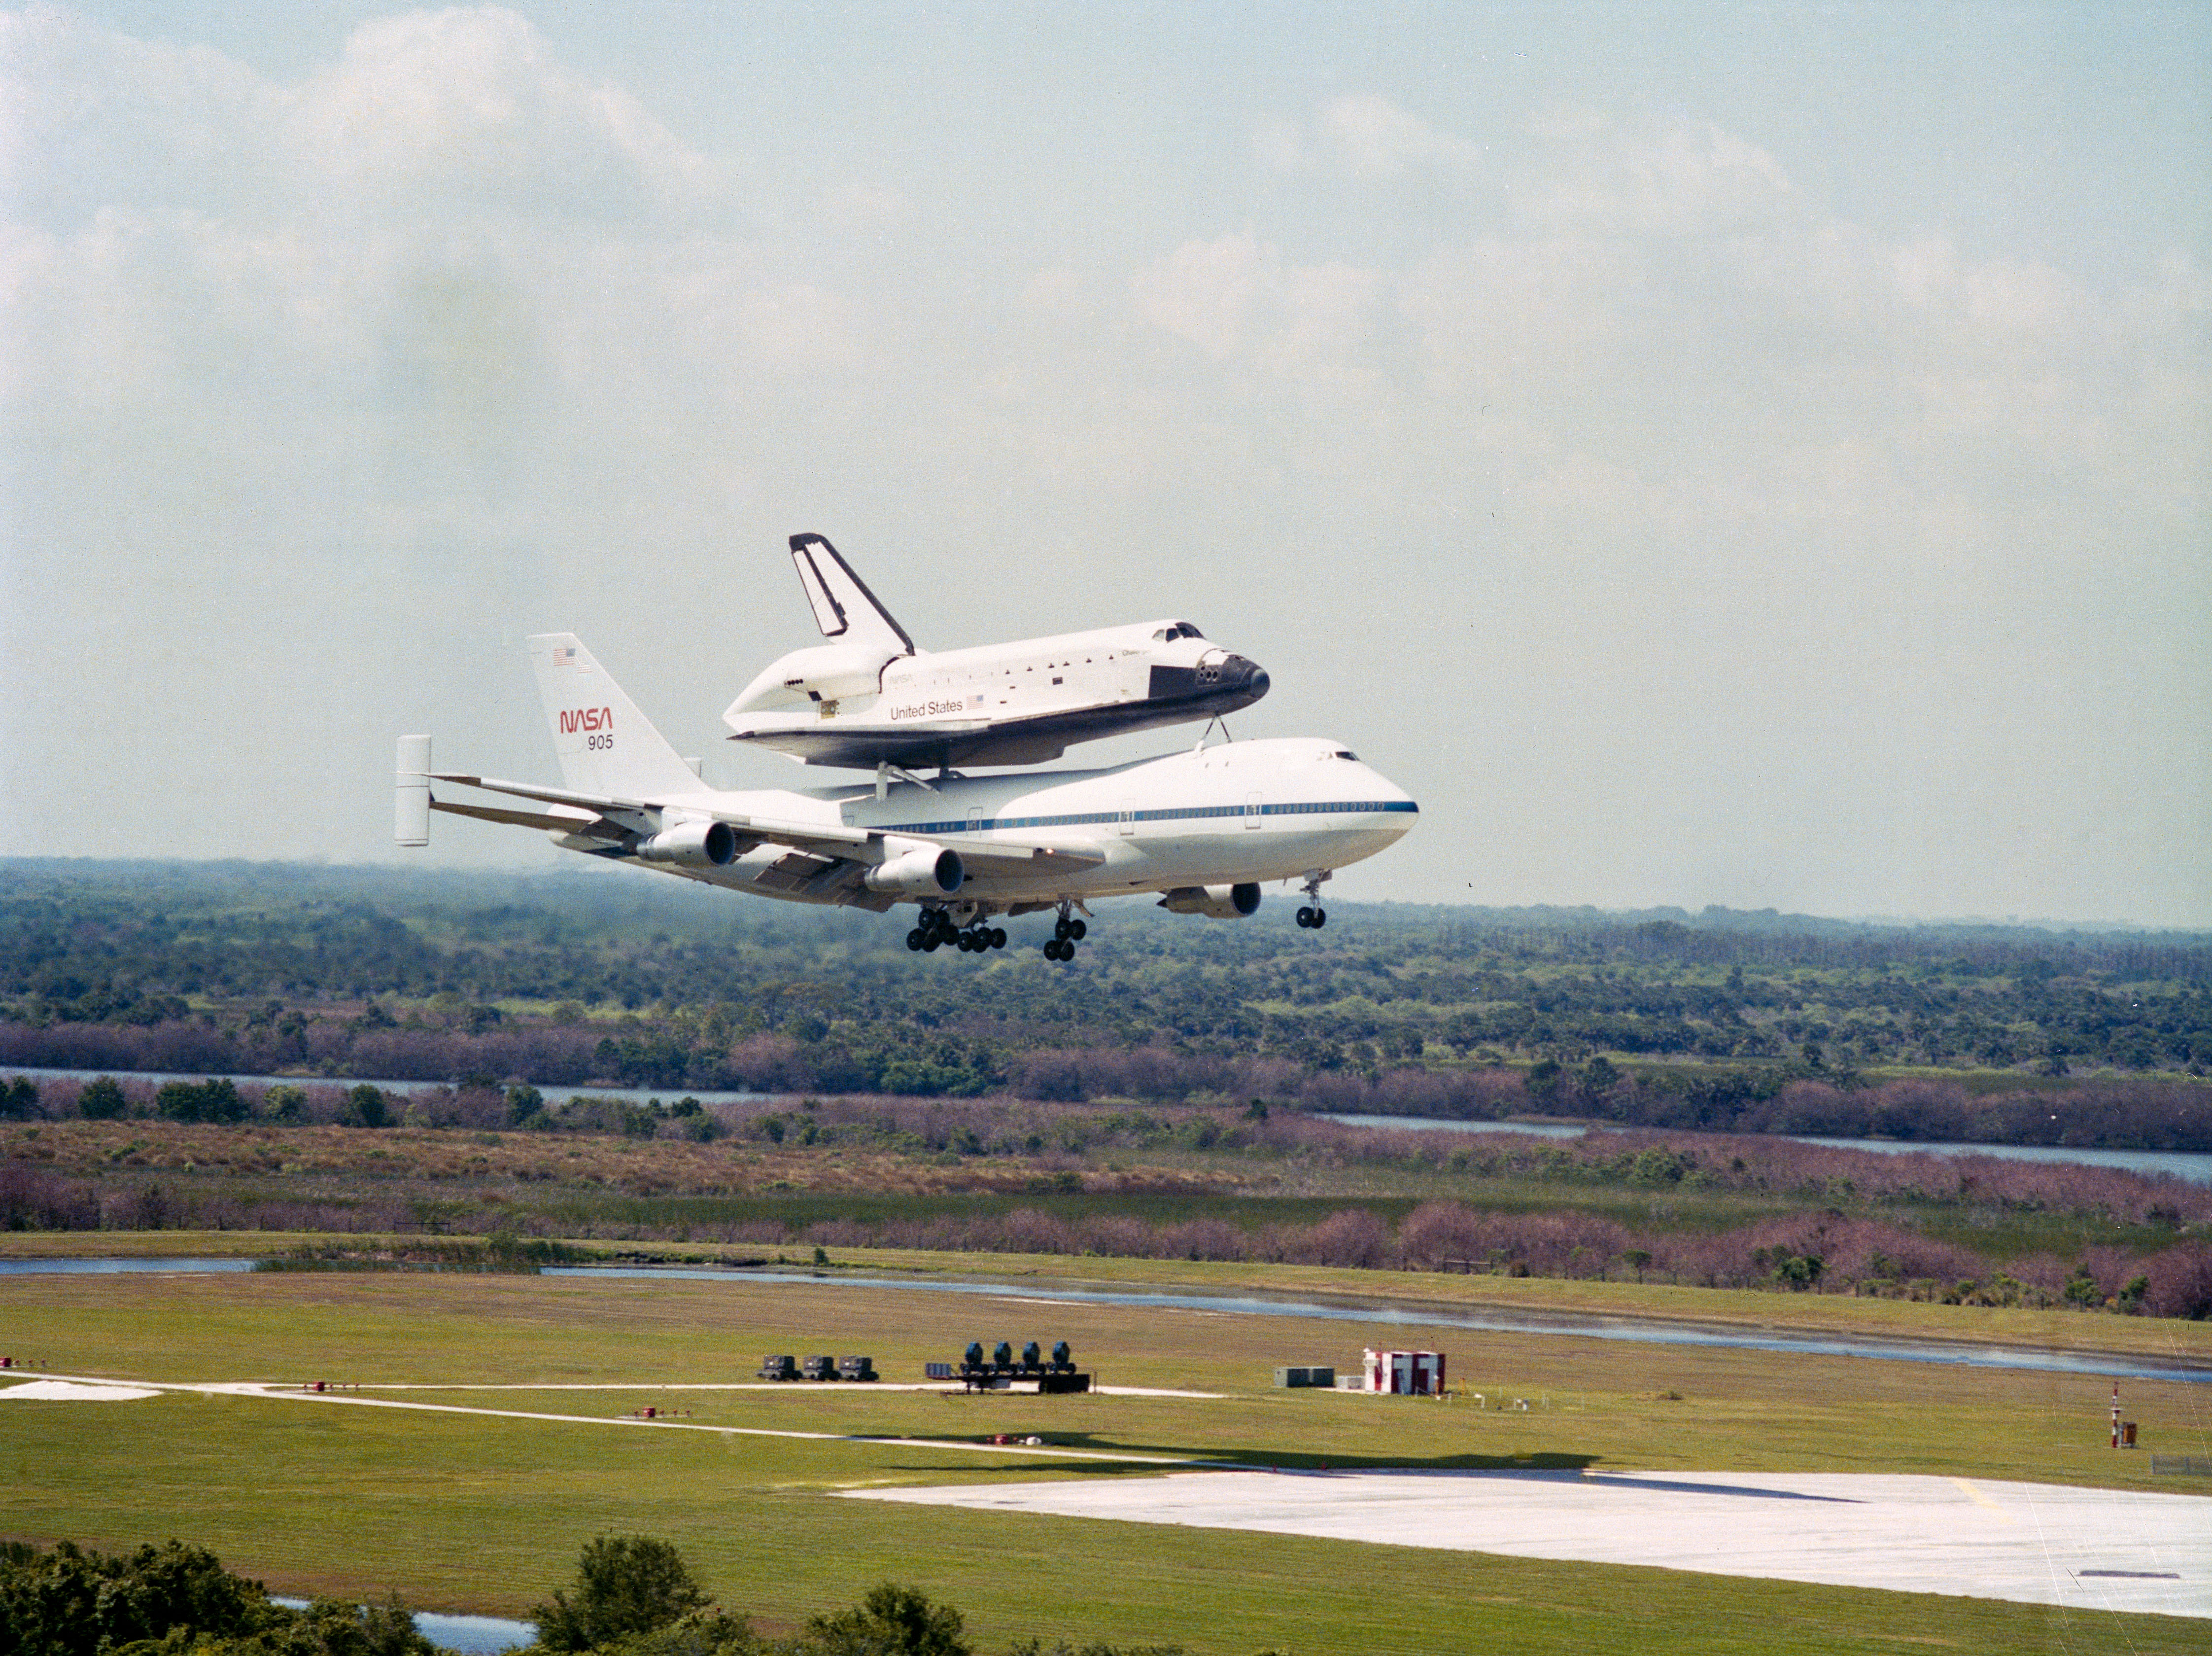 Space shuttle Challenger arrives back at NASA’s Kennedy Space Center in Florida atop a Shuttle Carrier Aircraft